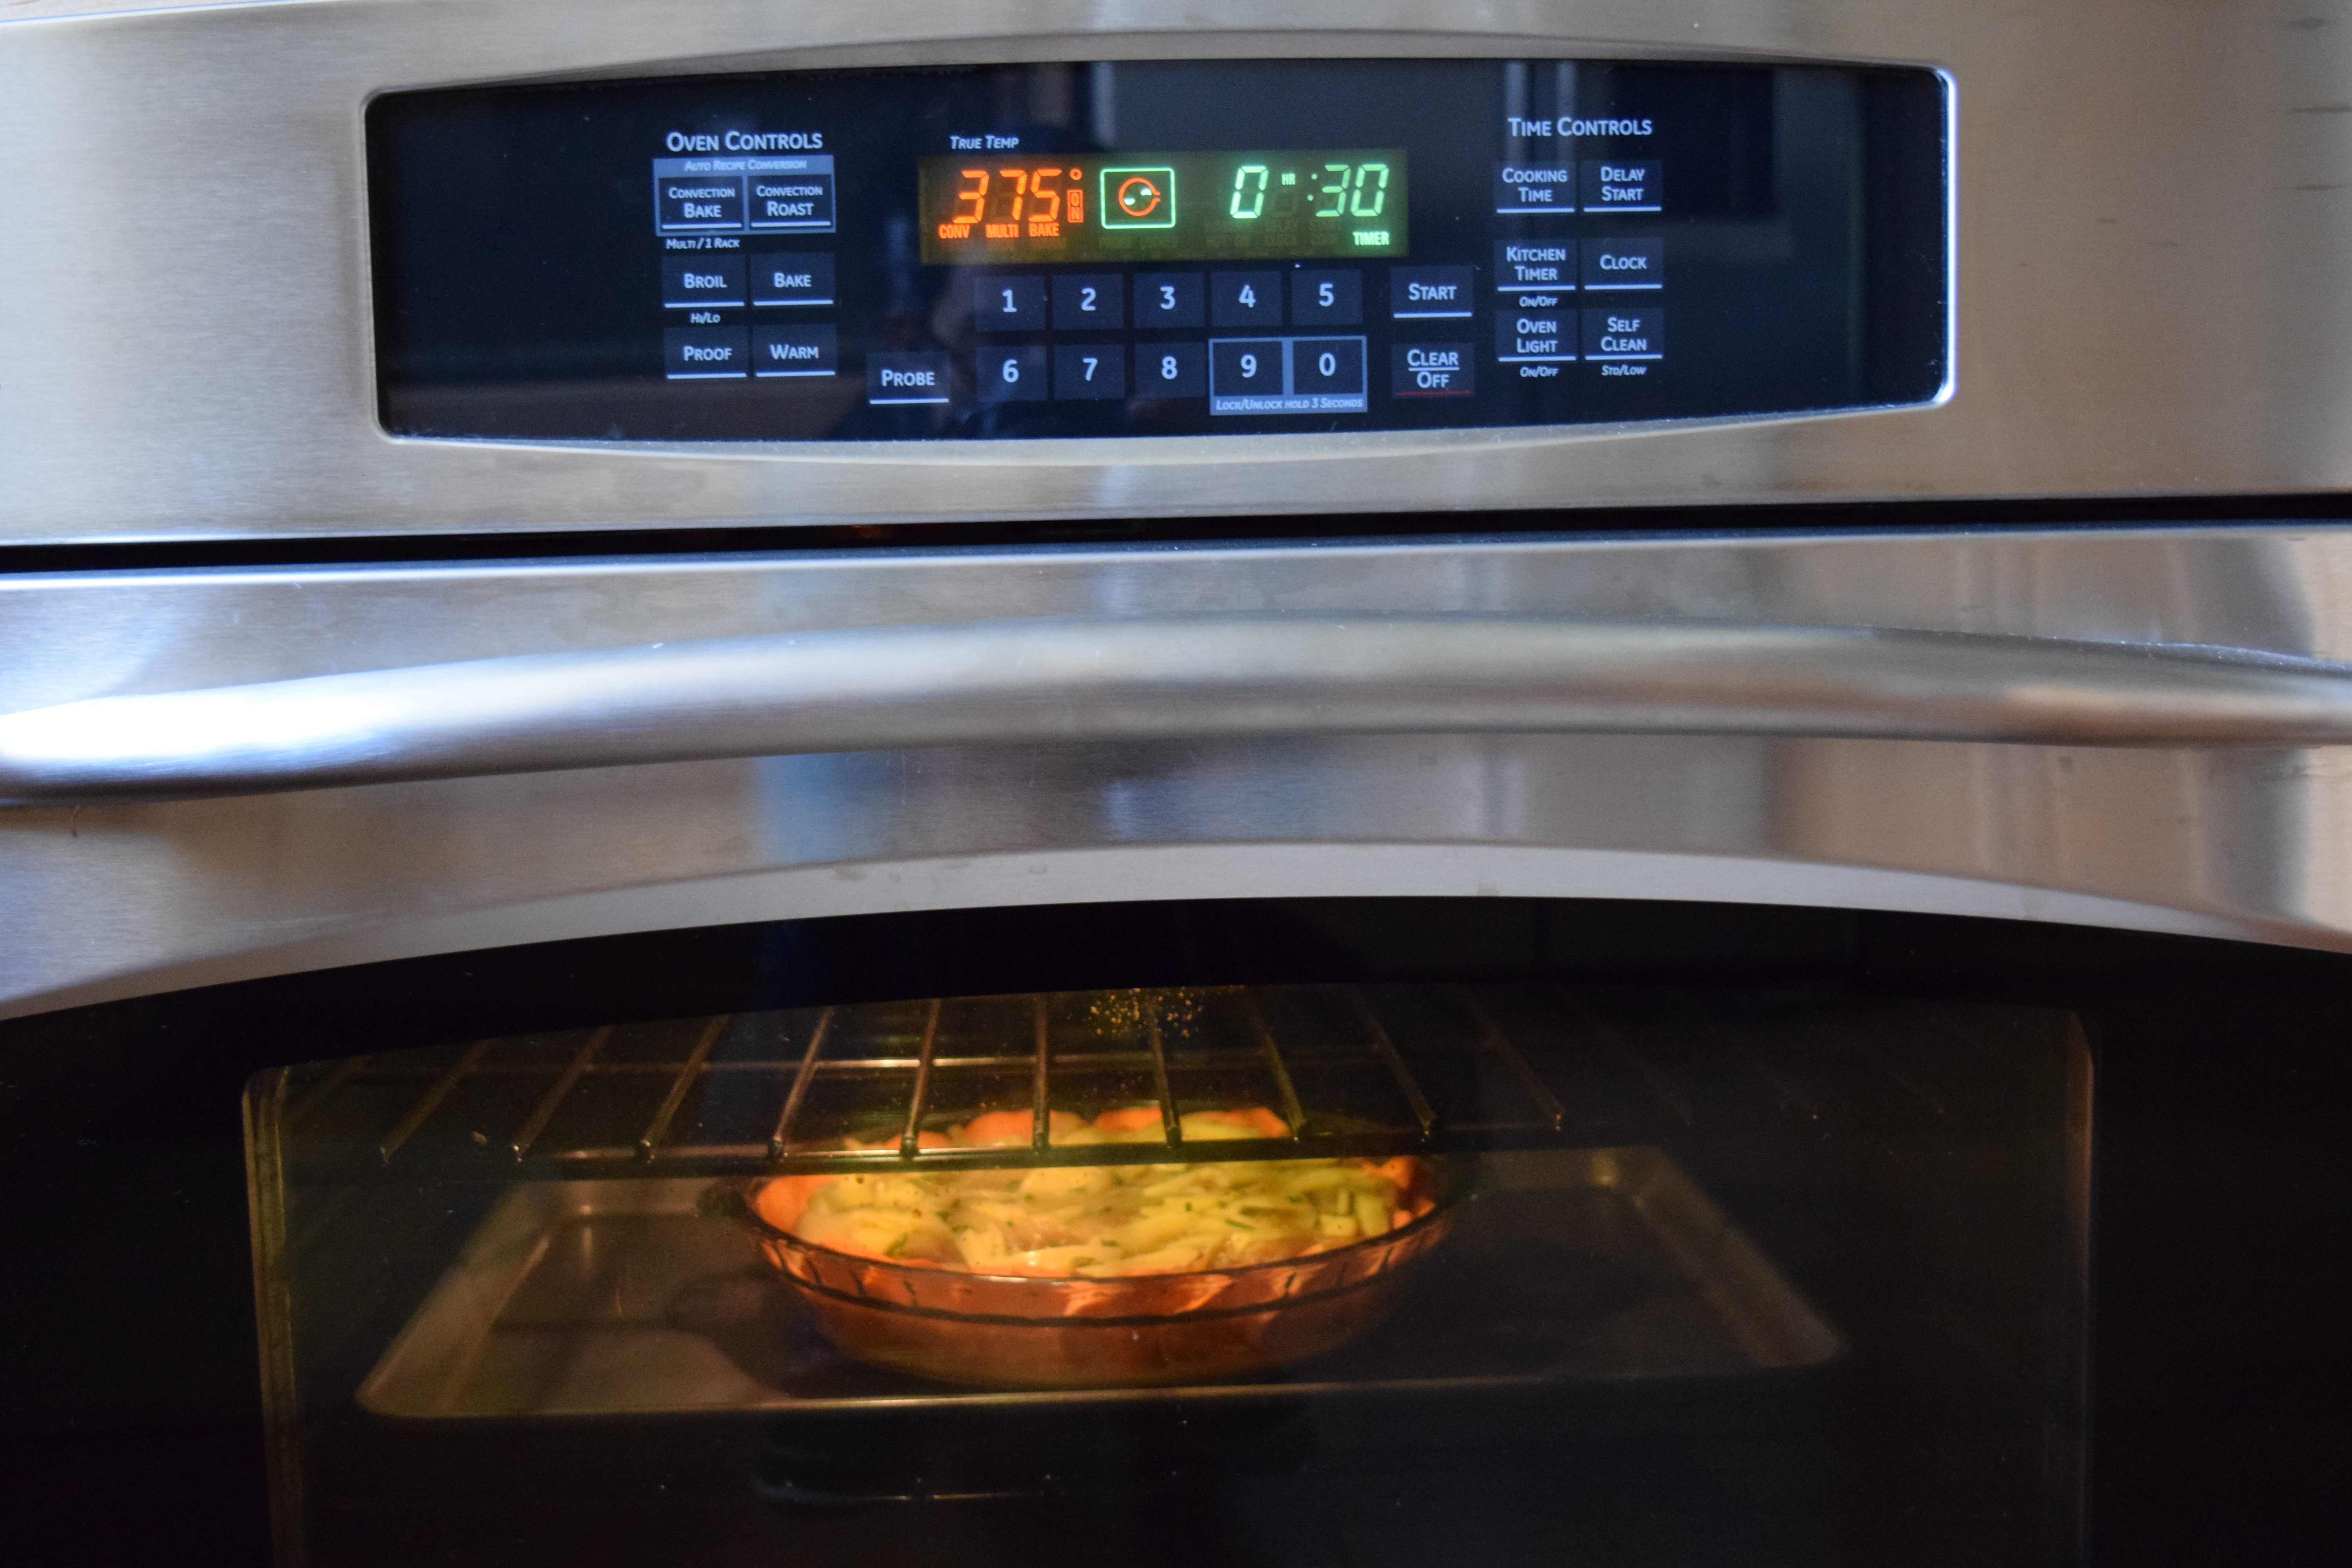 Quiche baking in the oven